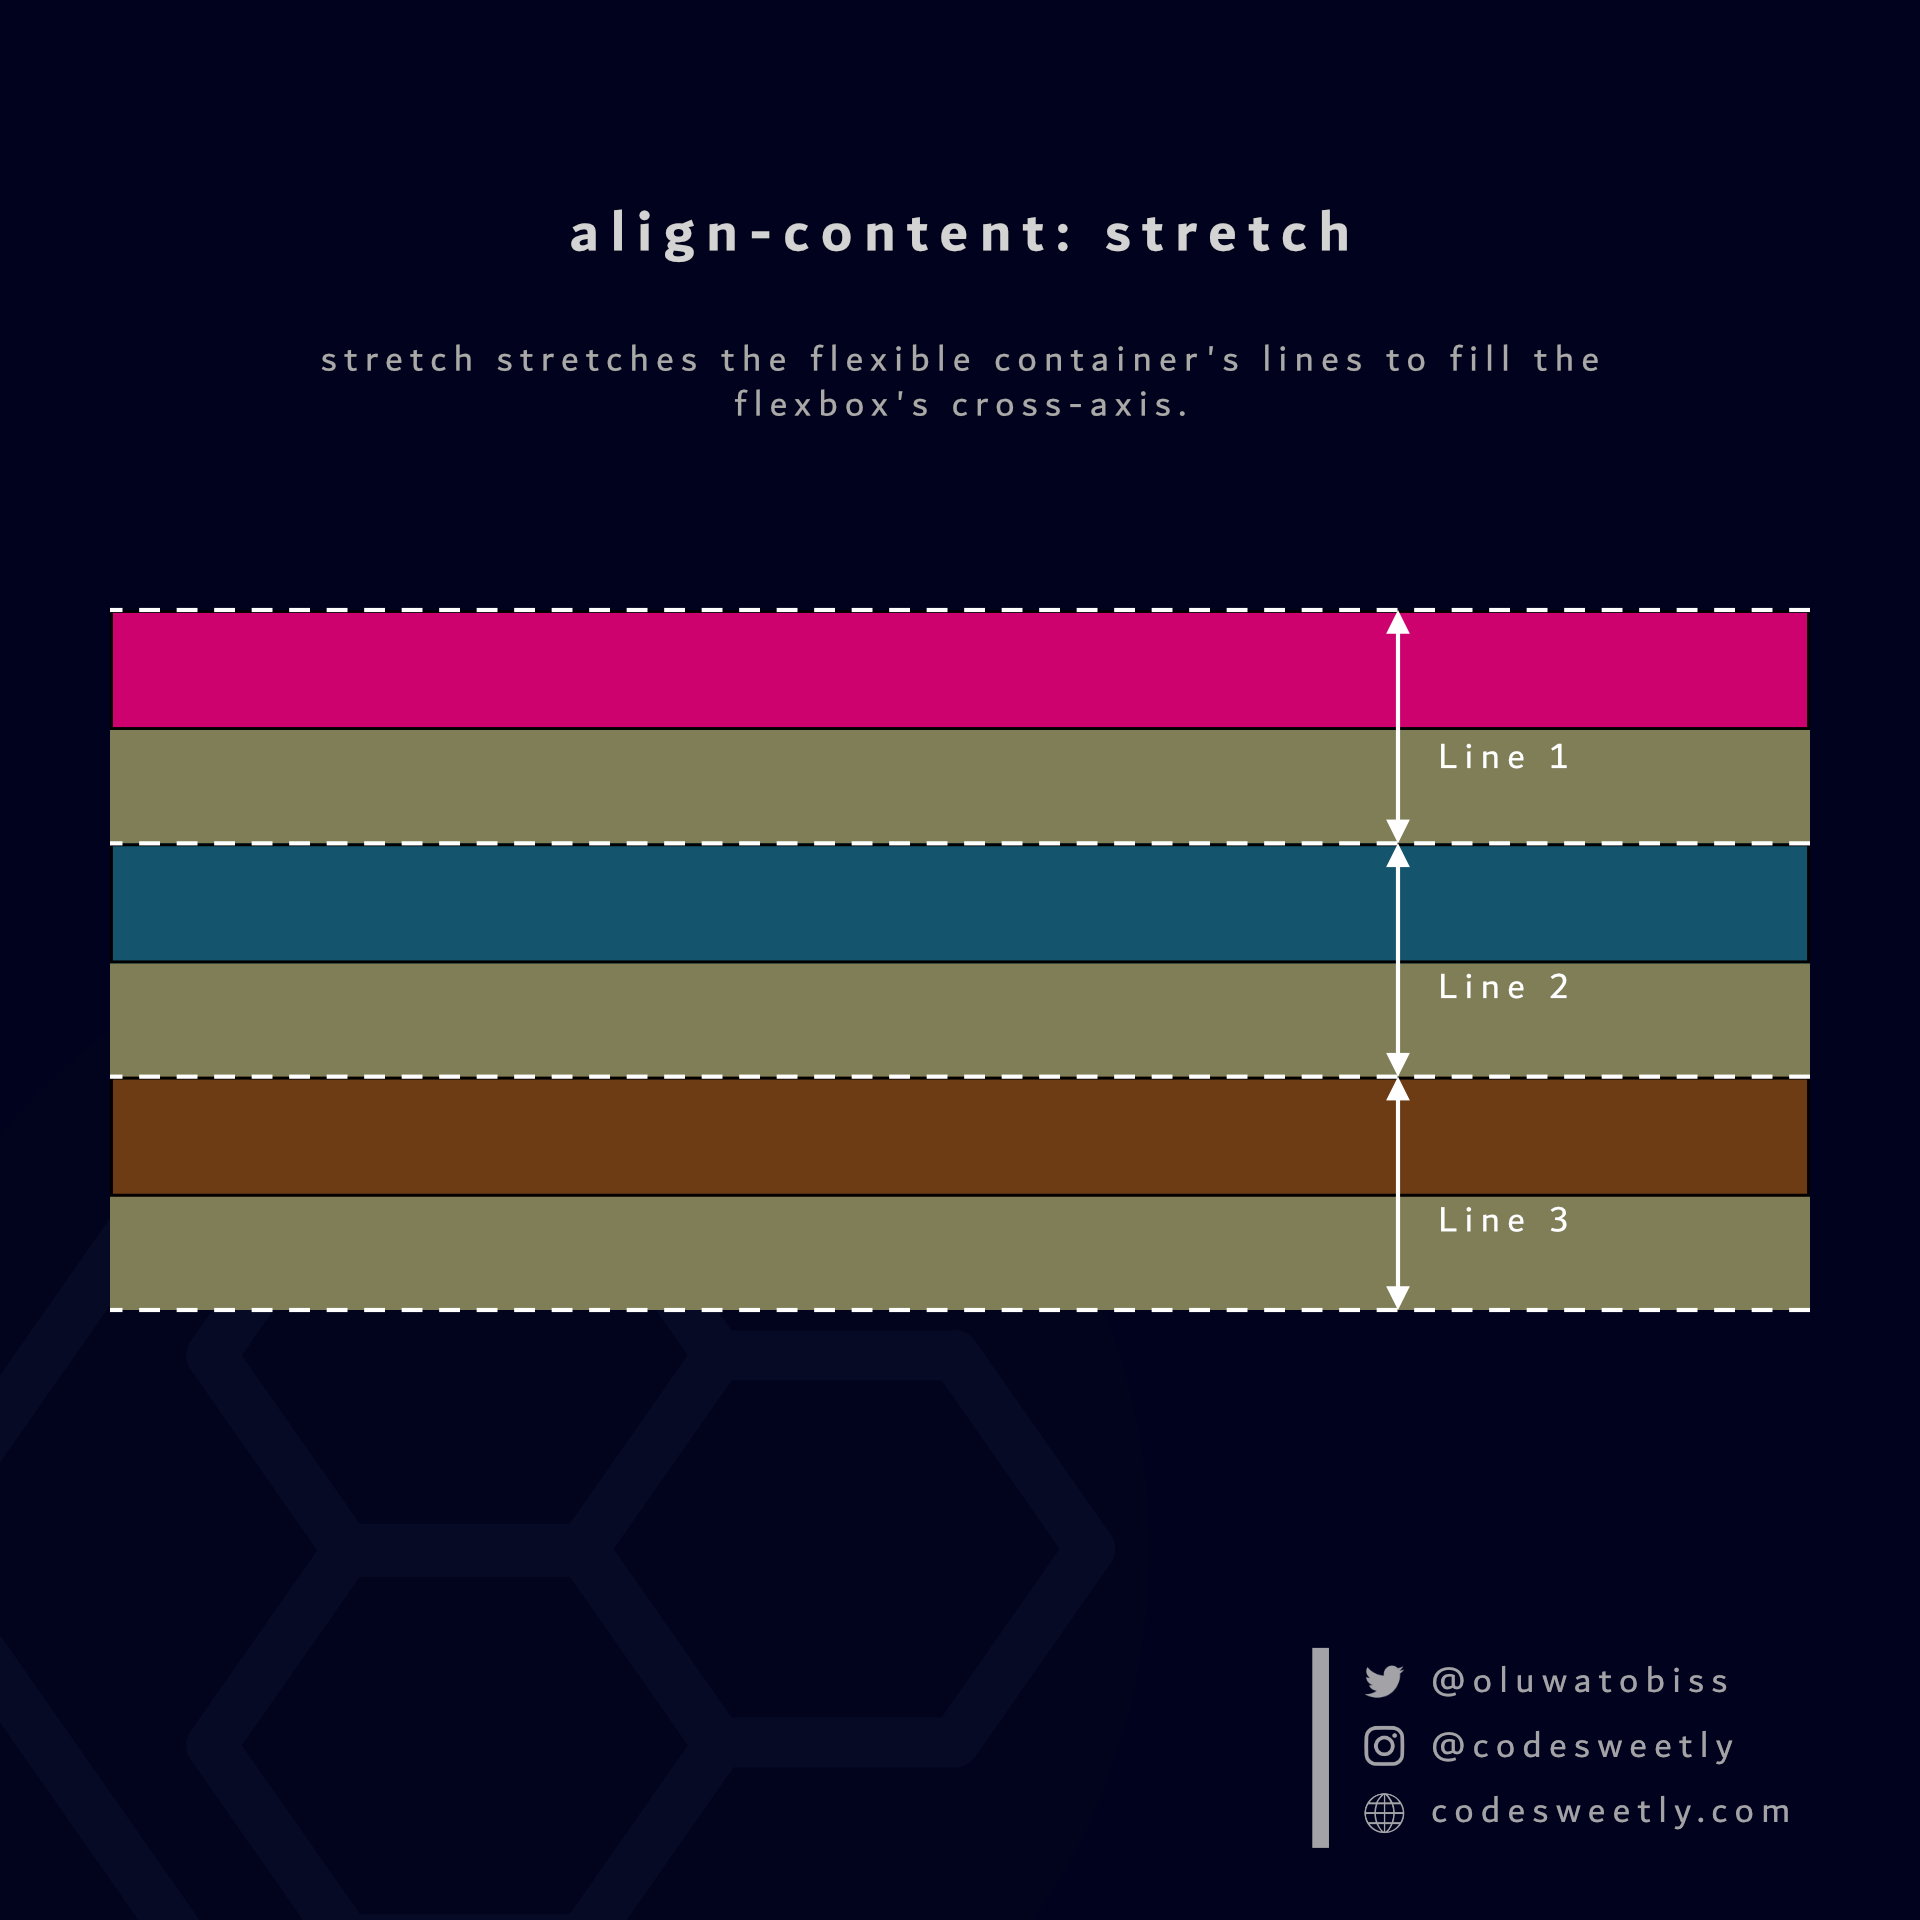 align-content's stretch value stretches flexbox's lines to fill the container's cross-axis